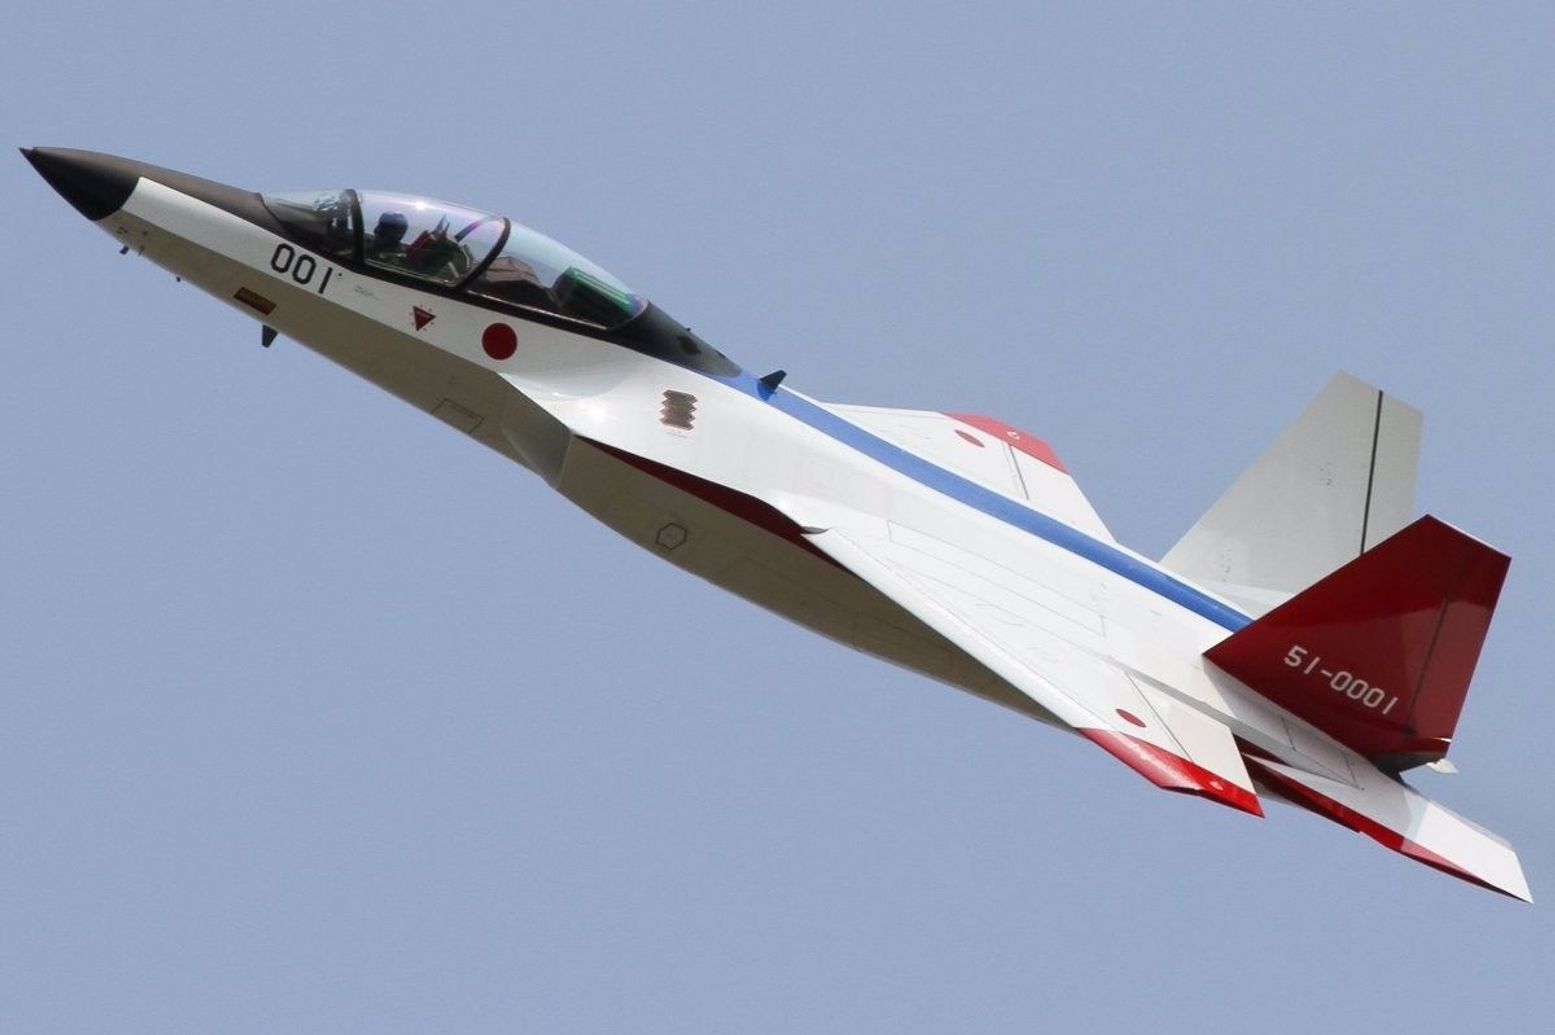 Study This Picture: Meet Japan's Mitsubishi X-2 Shinshin Stealth Fighter |  The National Interest